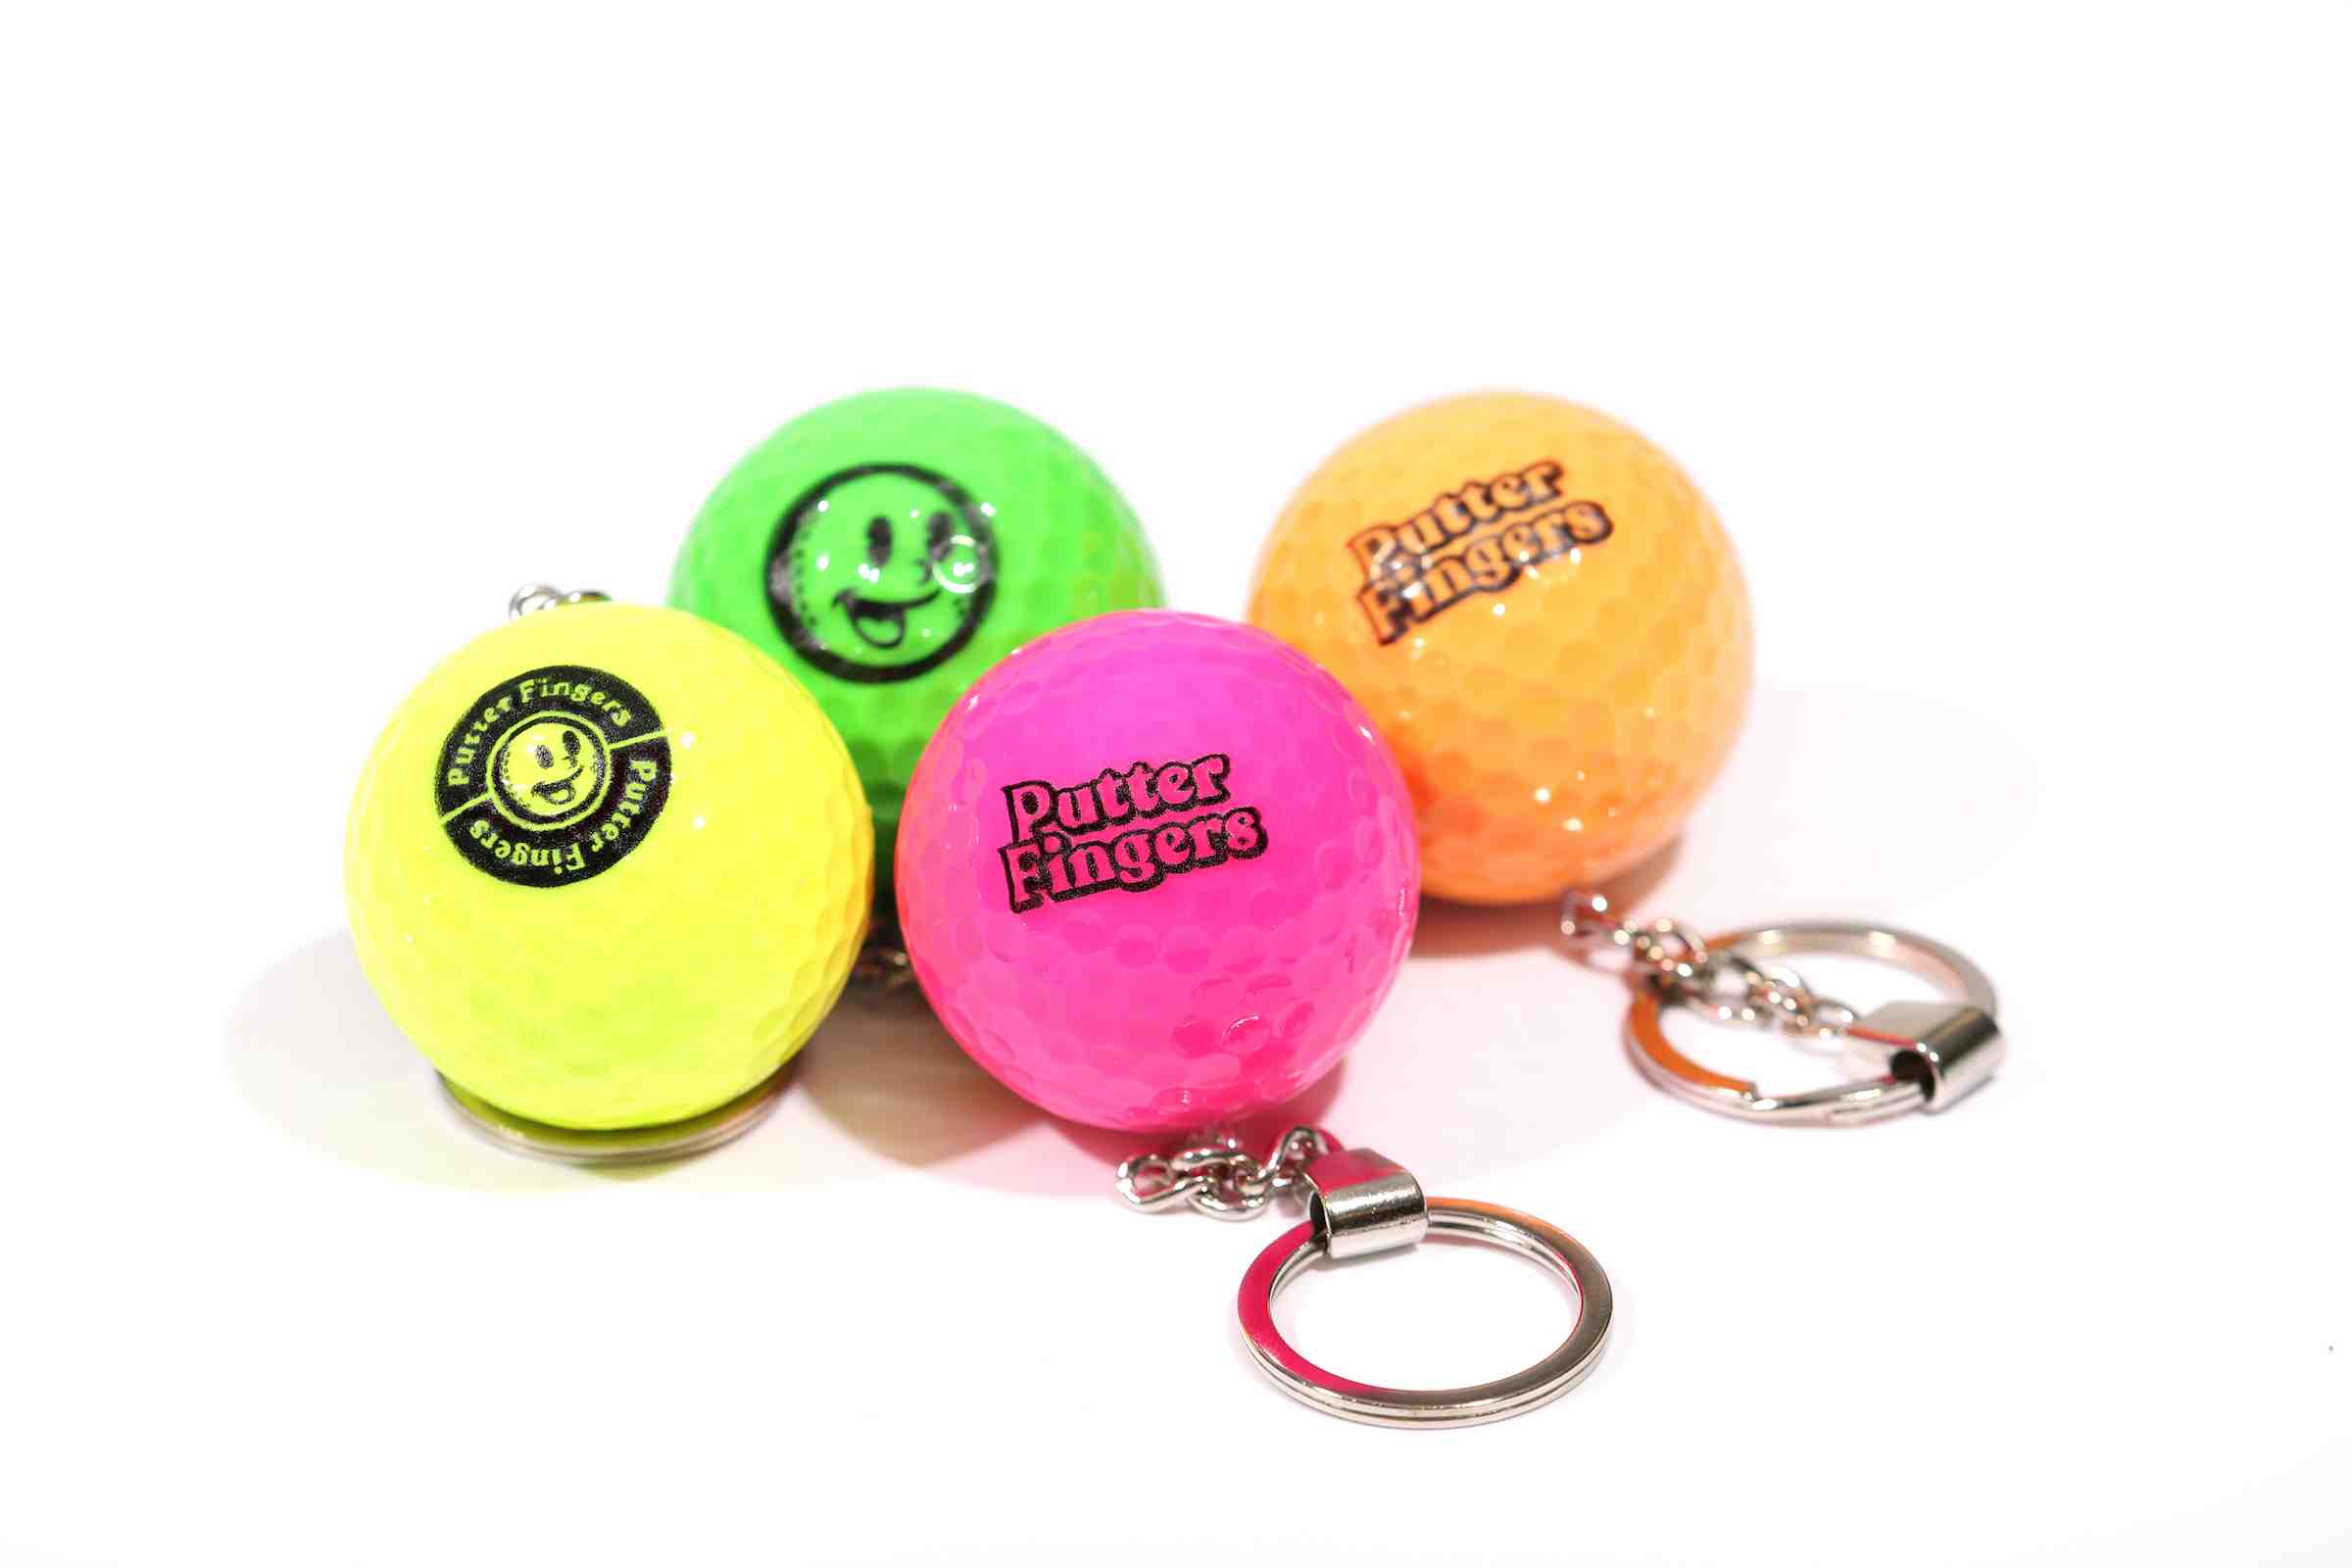 Four mini golf ball keyrings in yellow, green, pink, and orange colors, each featuring the Putterfingers logo branding on them